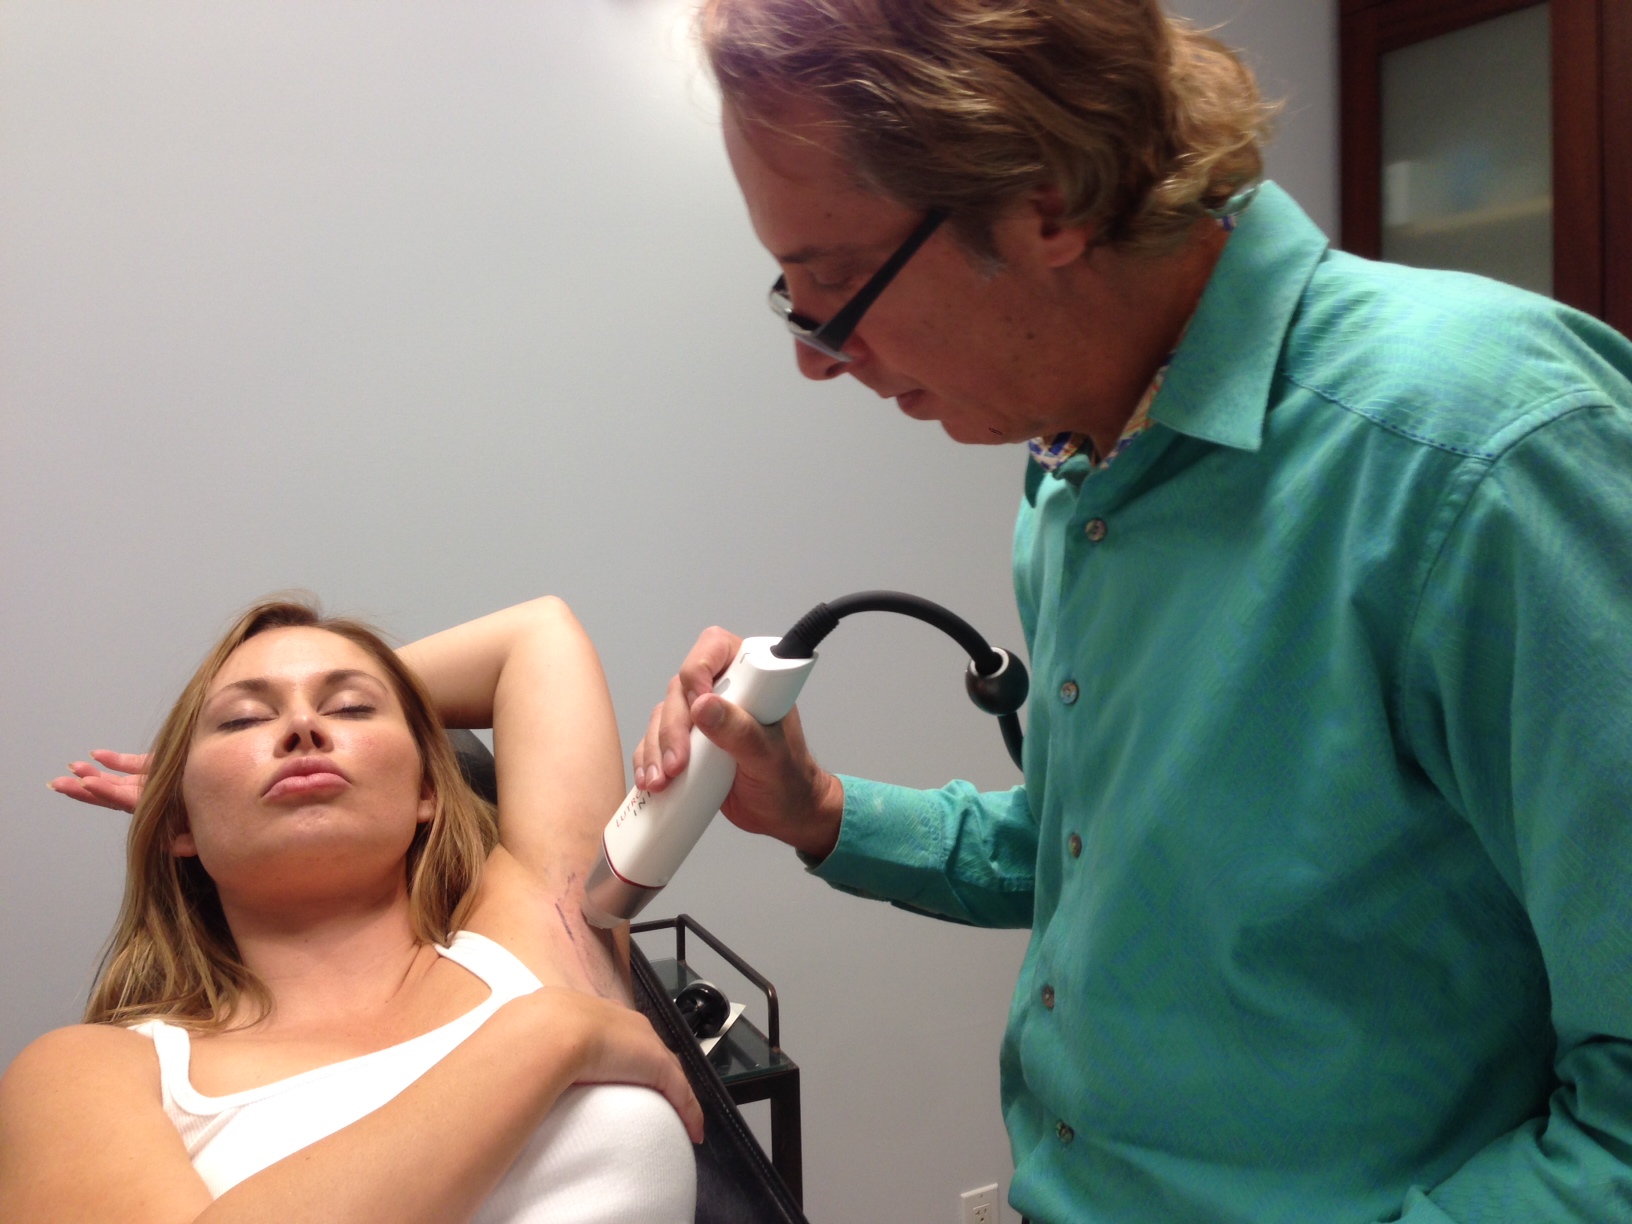 Dr. Steven Weiner treating axilla for sweating using the Infini